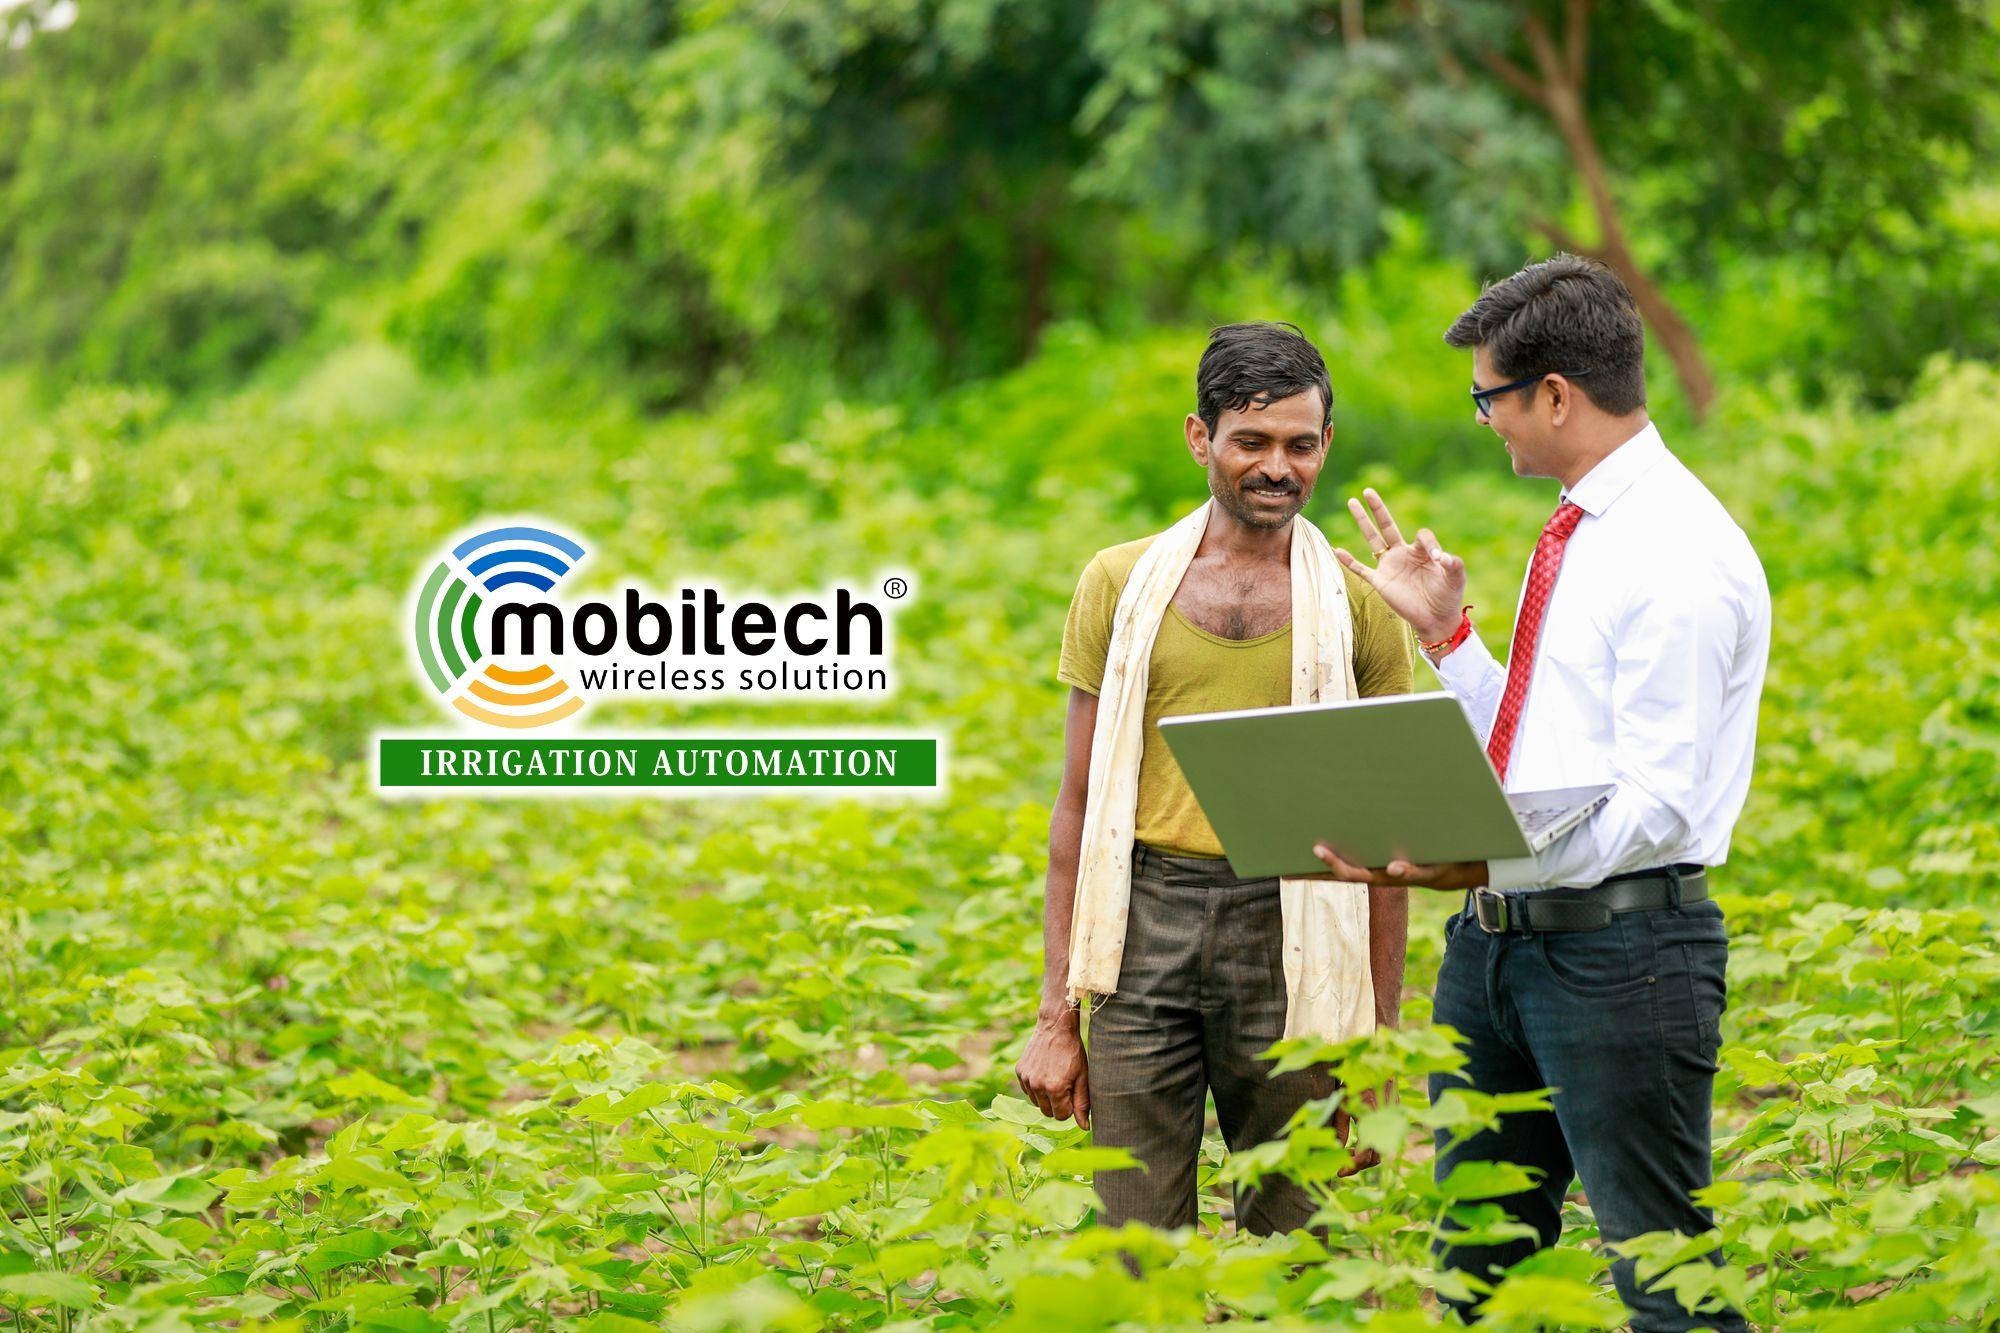 From Struggle to Abundance: Shankar’s Journey with Mobitech’s Solutions